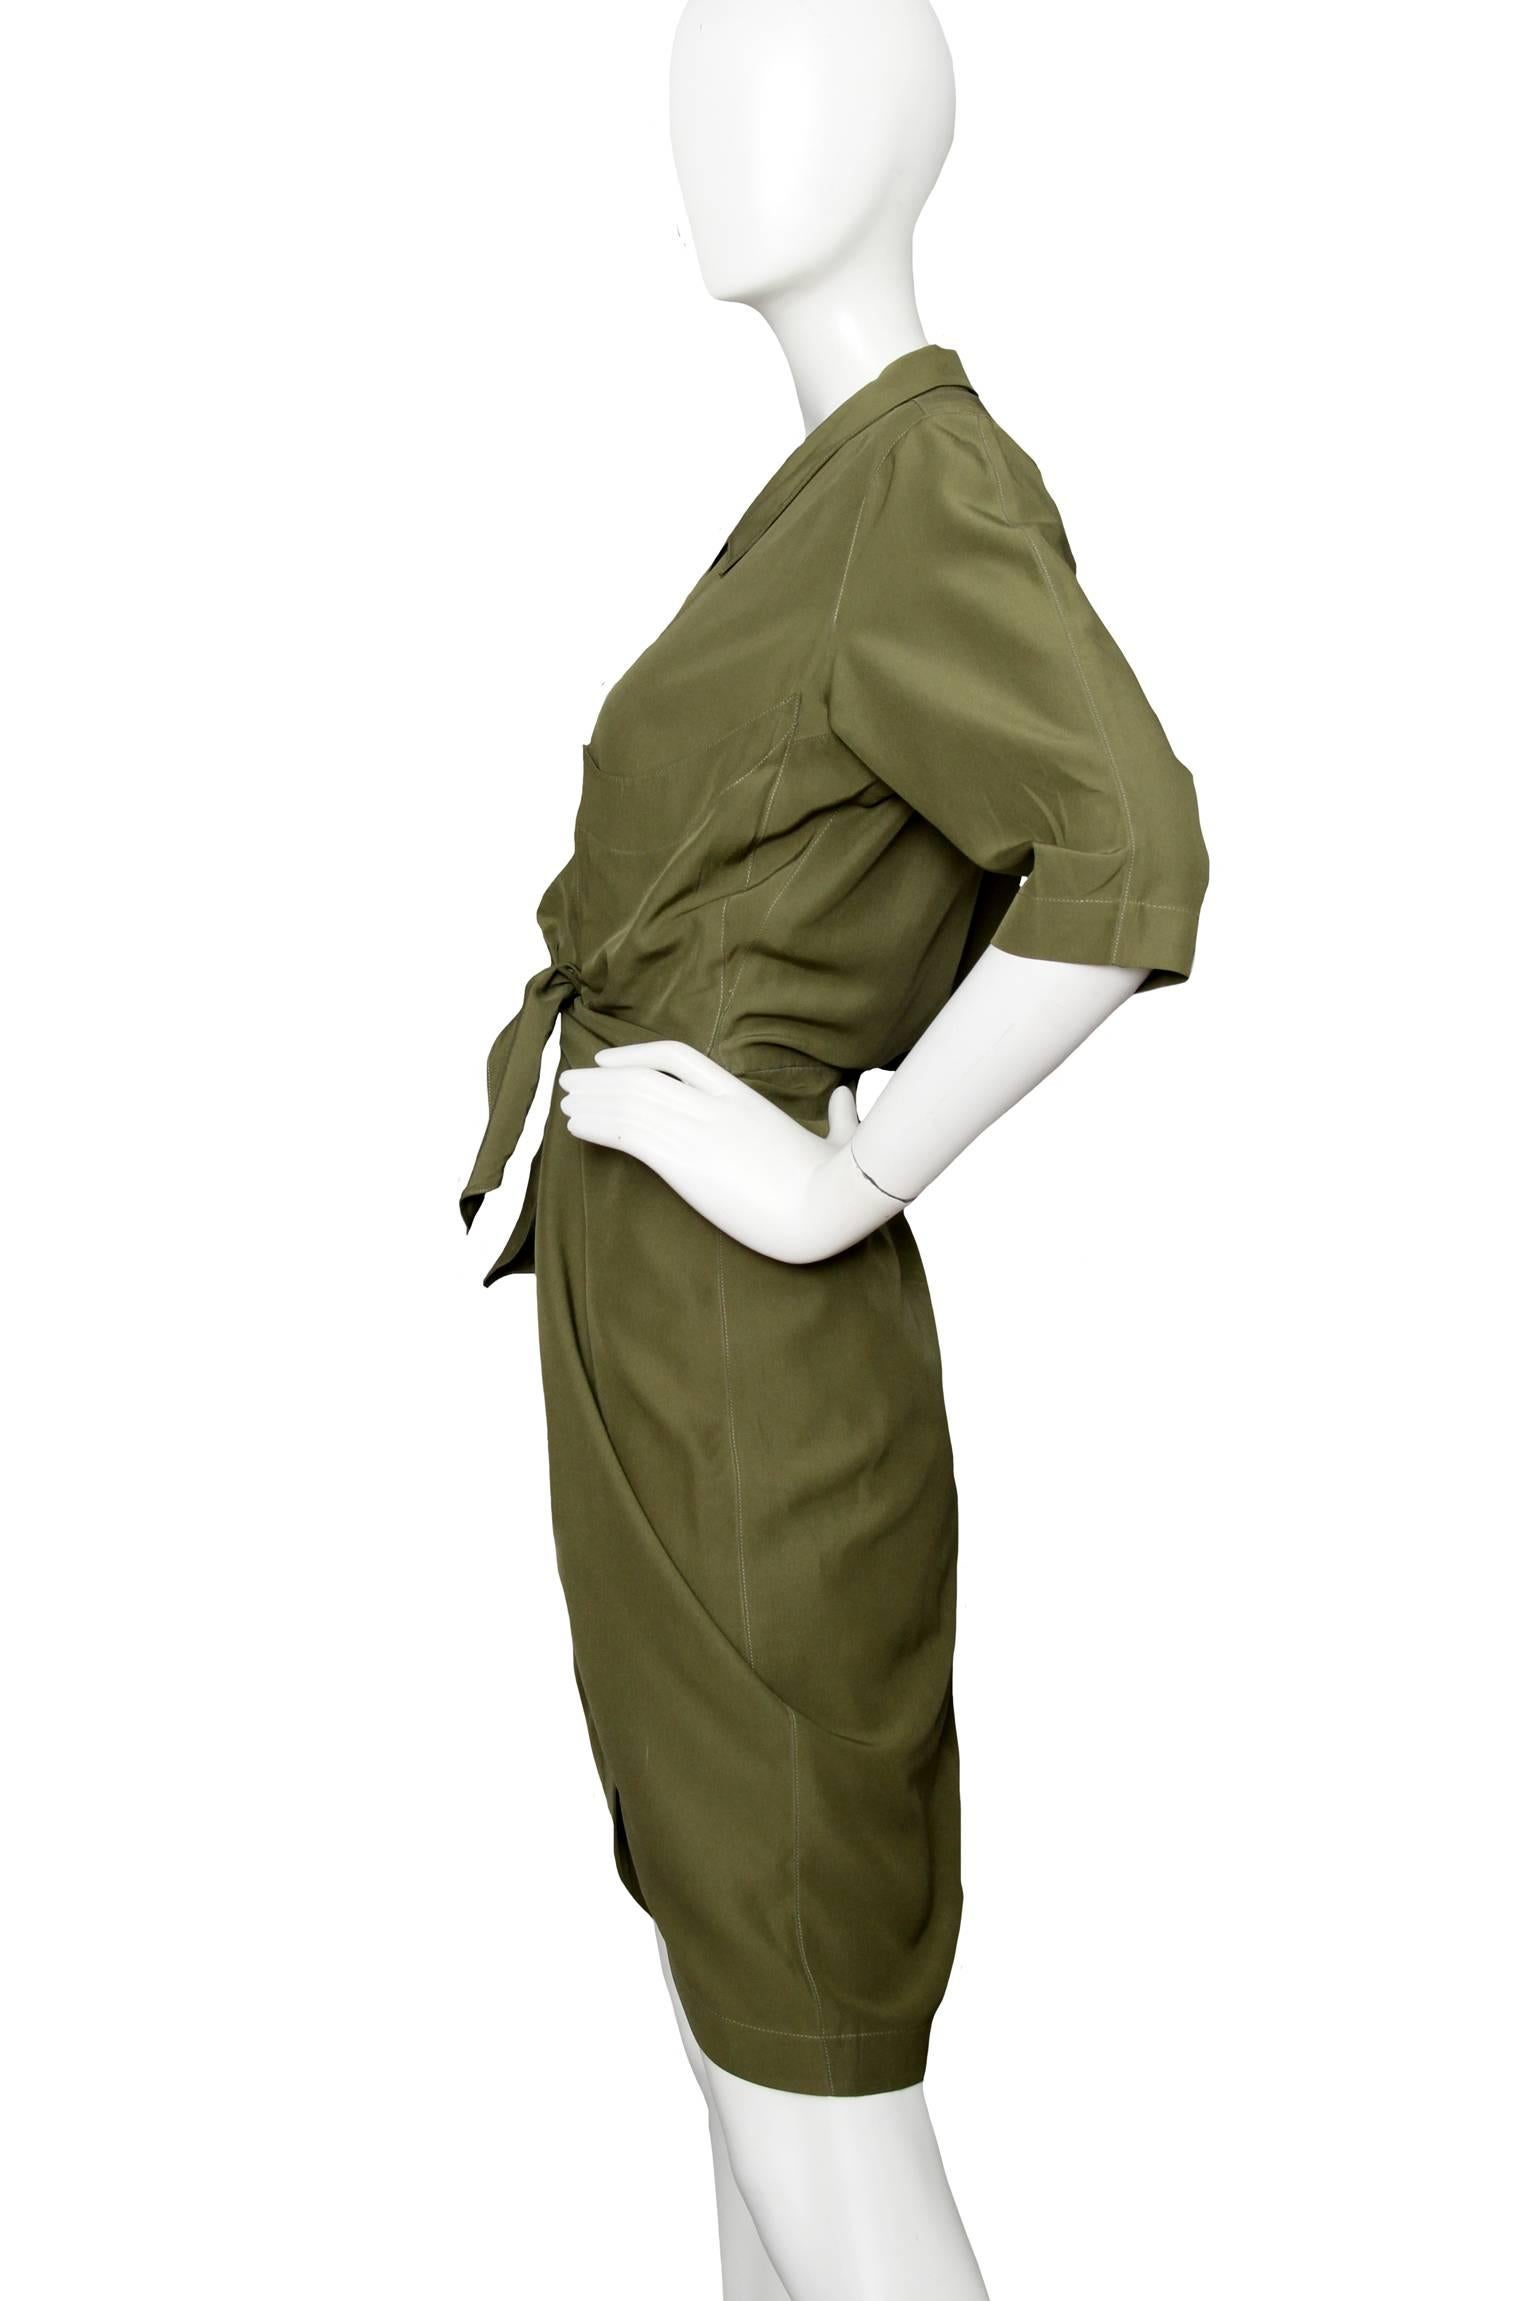 A 1980s Thierry Mugler forest green silk shirt dress with short slouchy sleeves and a button down front with a push button closure. In the center front, the blouse has a tie waist that accentuates the waistline and creates a draped effect around the